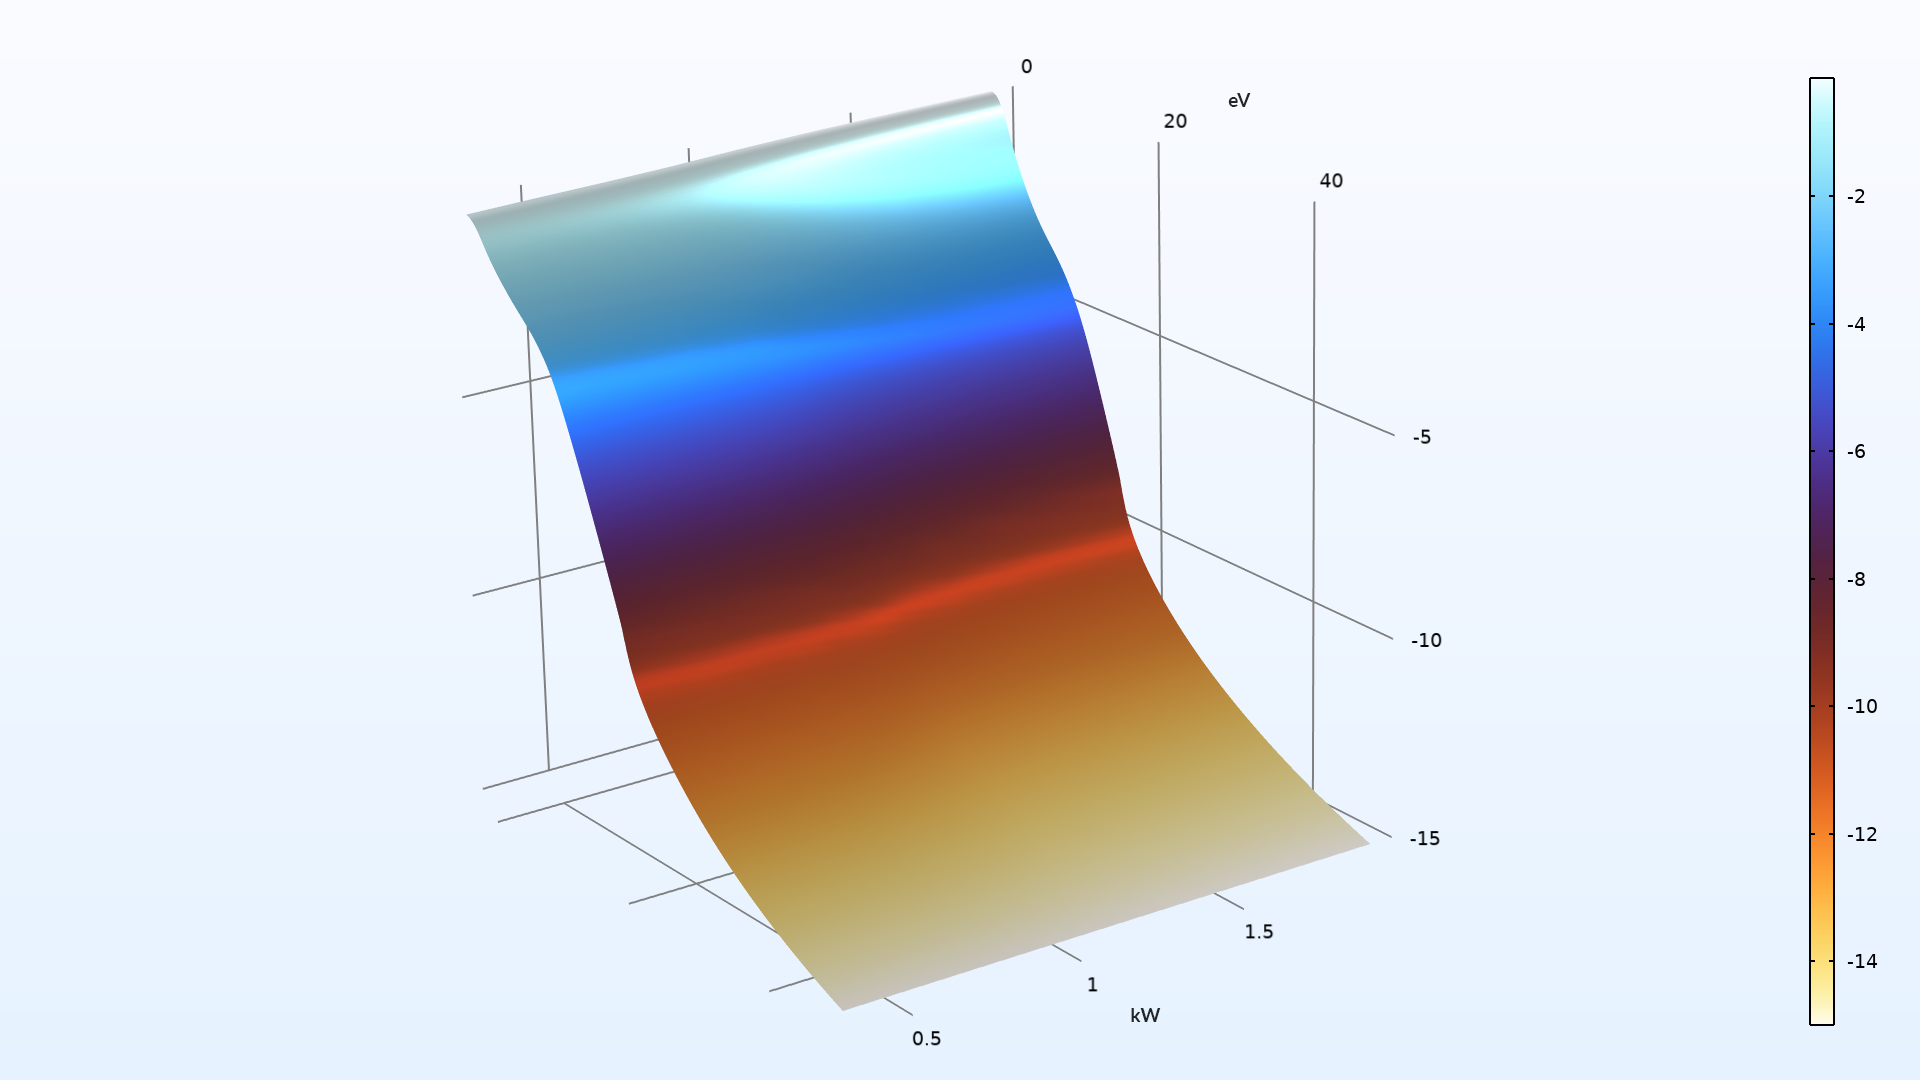 The Hydrogen Global Model showing the electron energy distribution in the Thermal Wave color table.